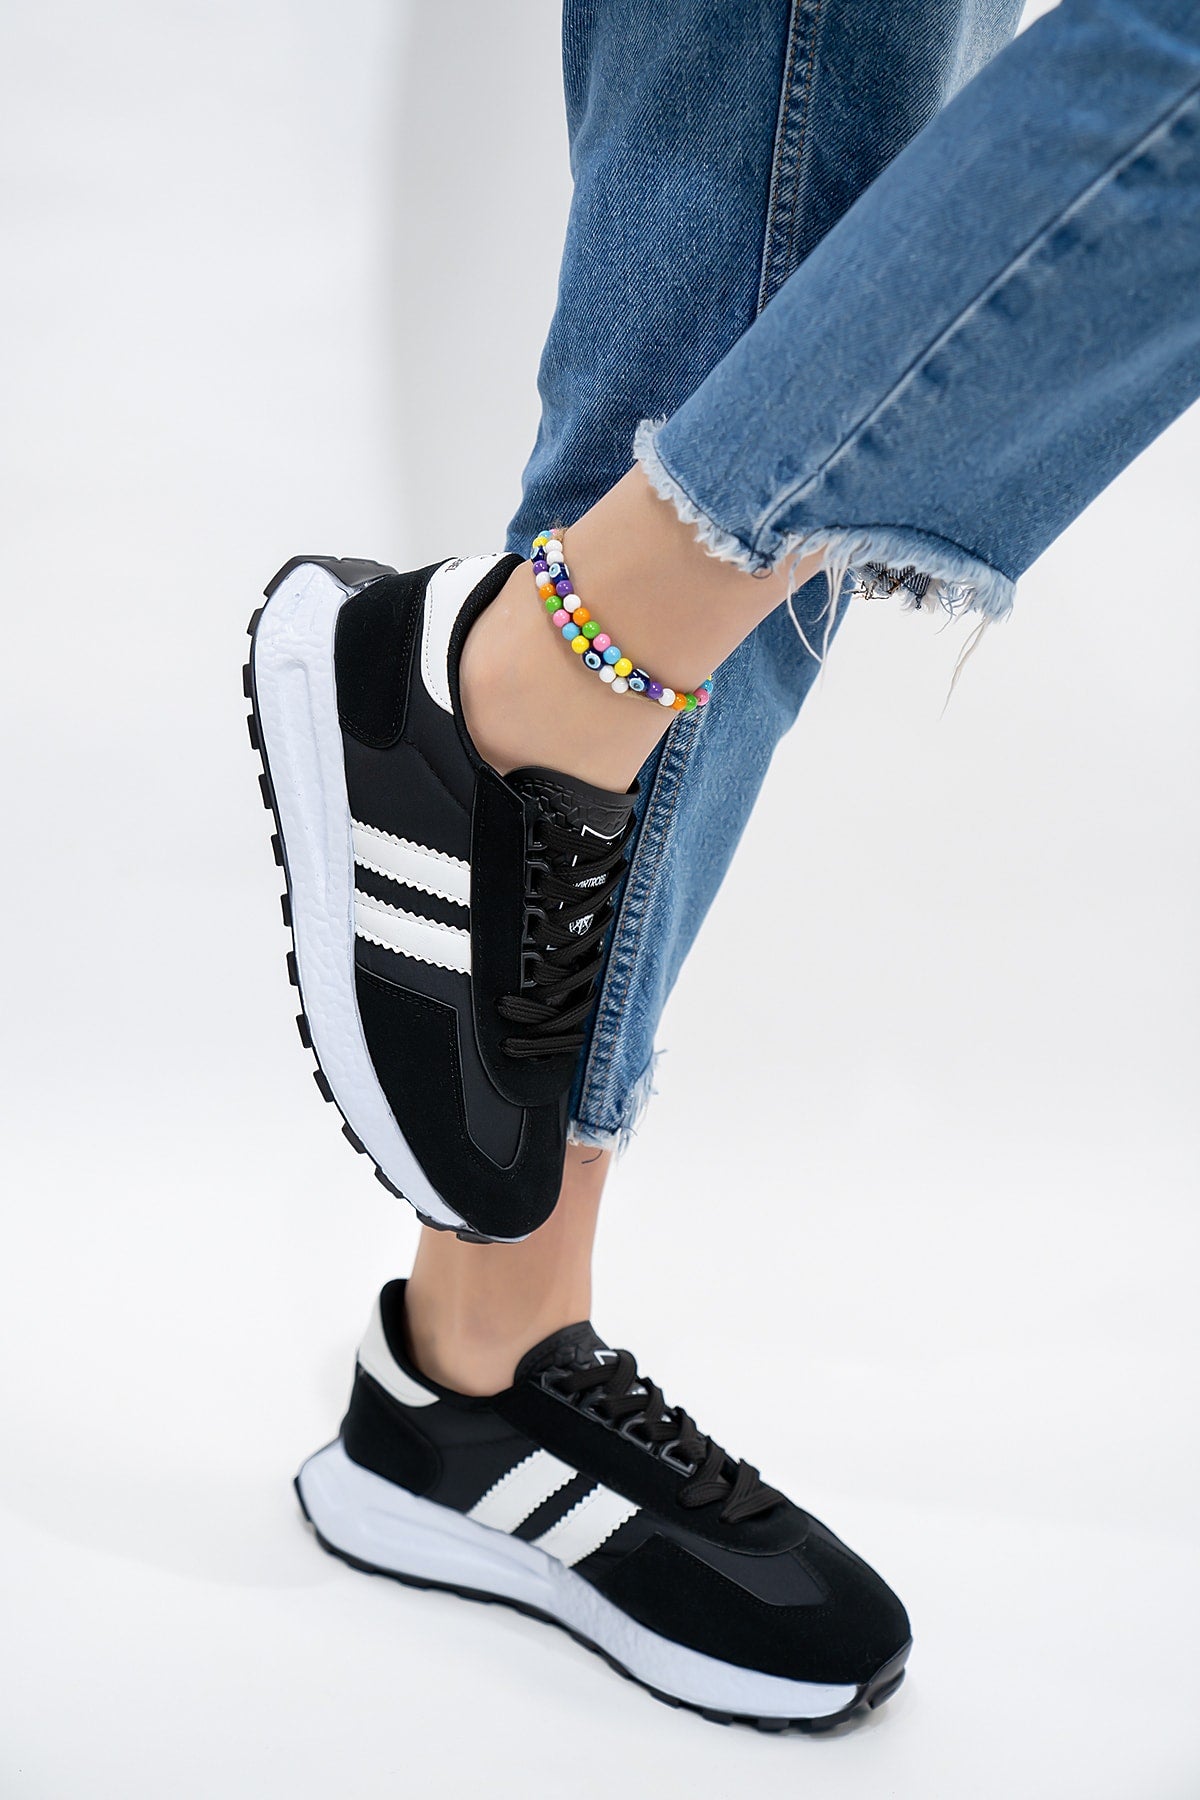 Unisex Snkr Black White Casual Casual Sports Shoes Sneaker